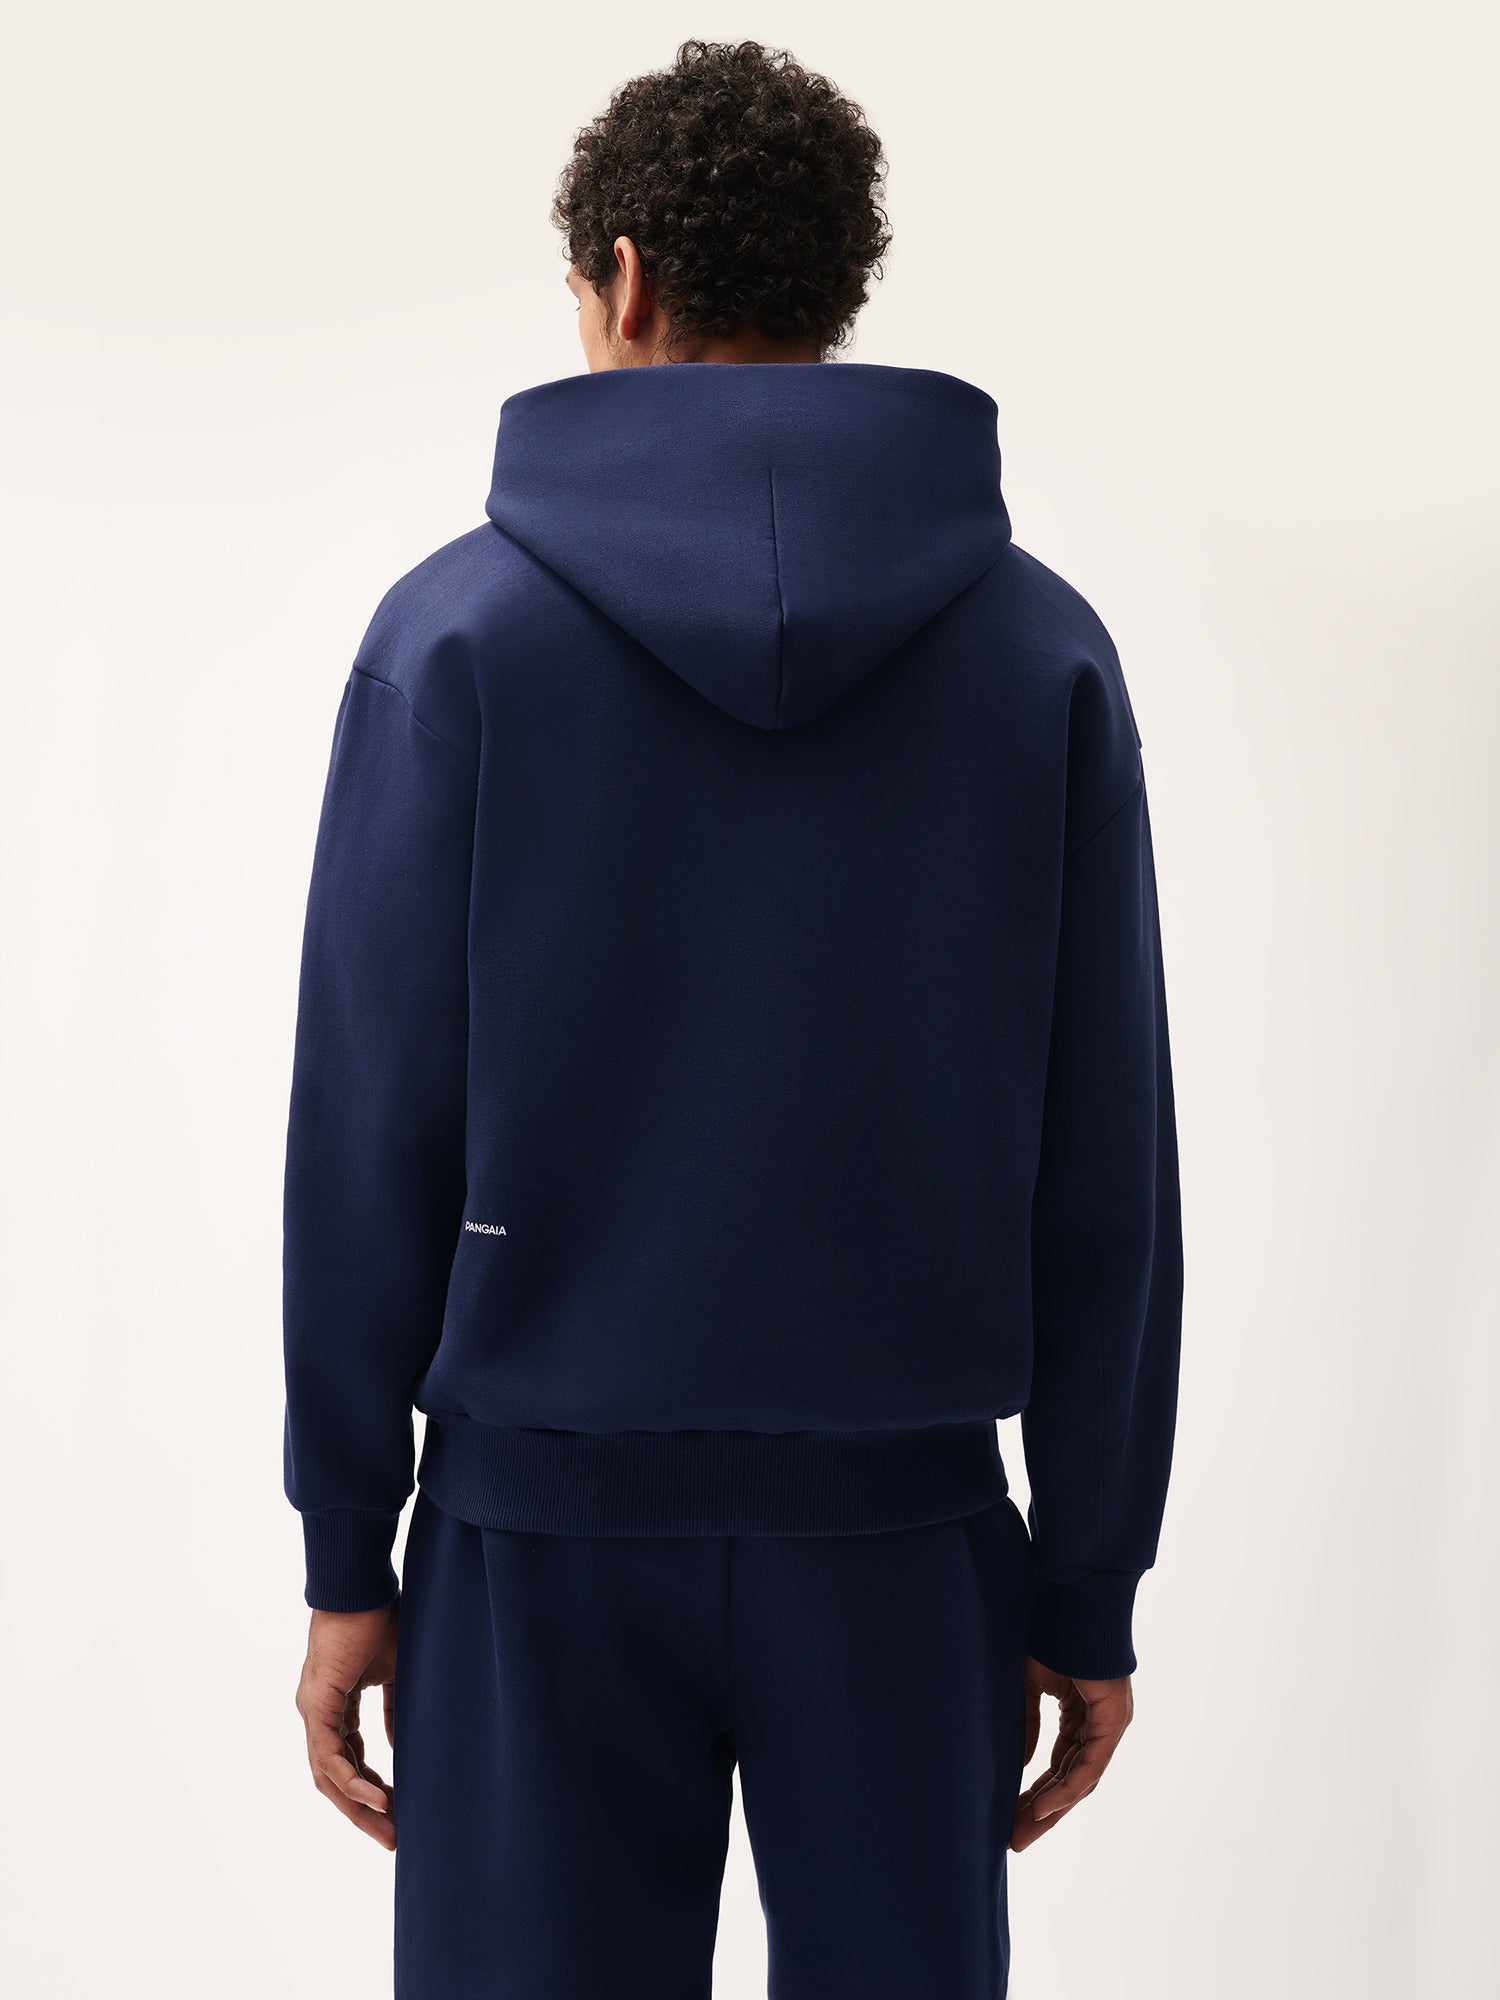 DNA_Hoodie_Navy_Male-2